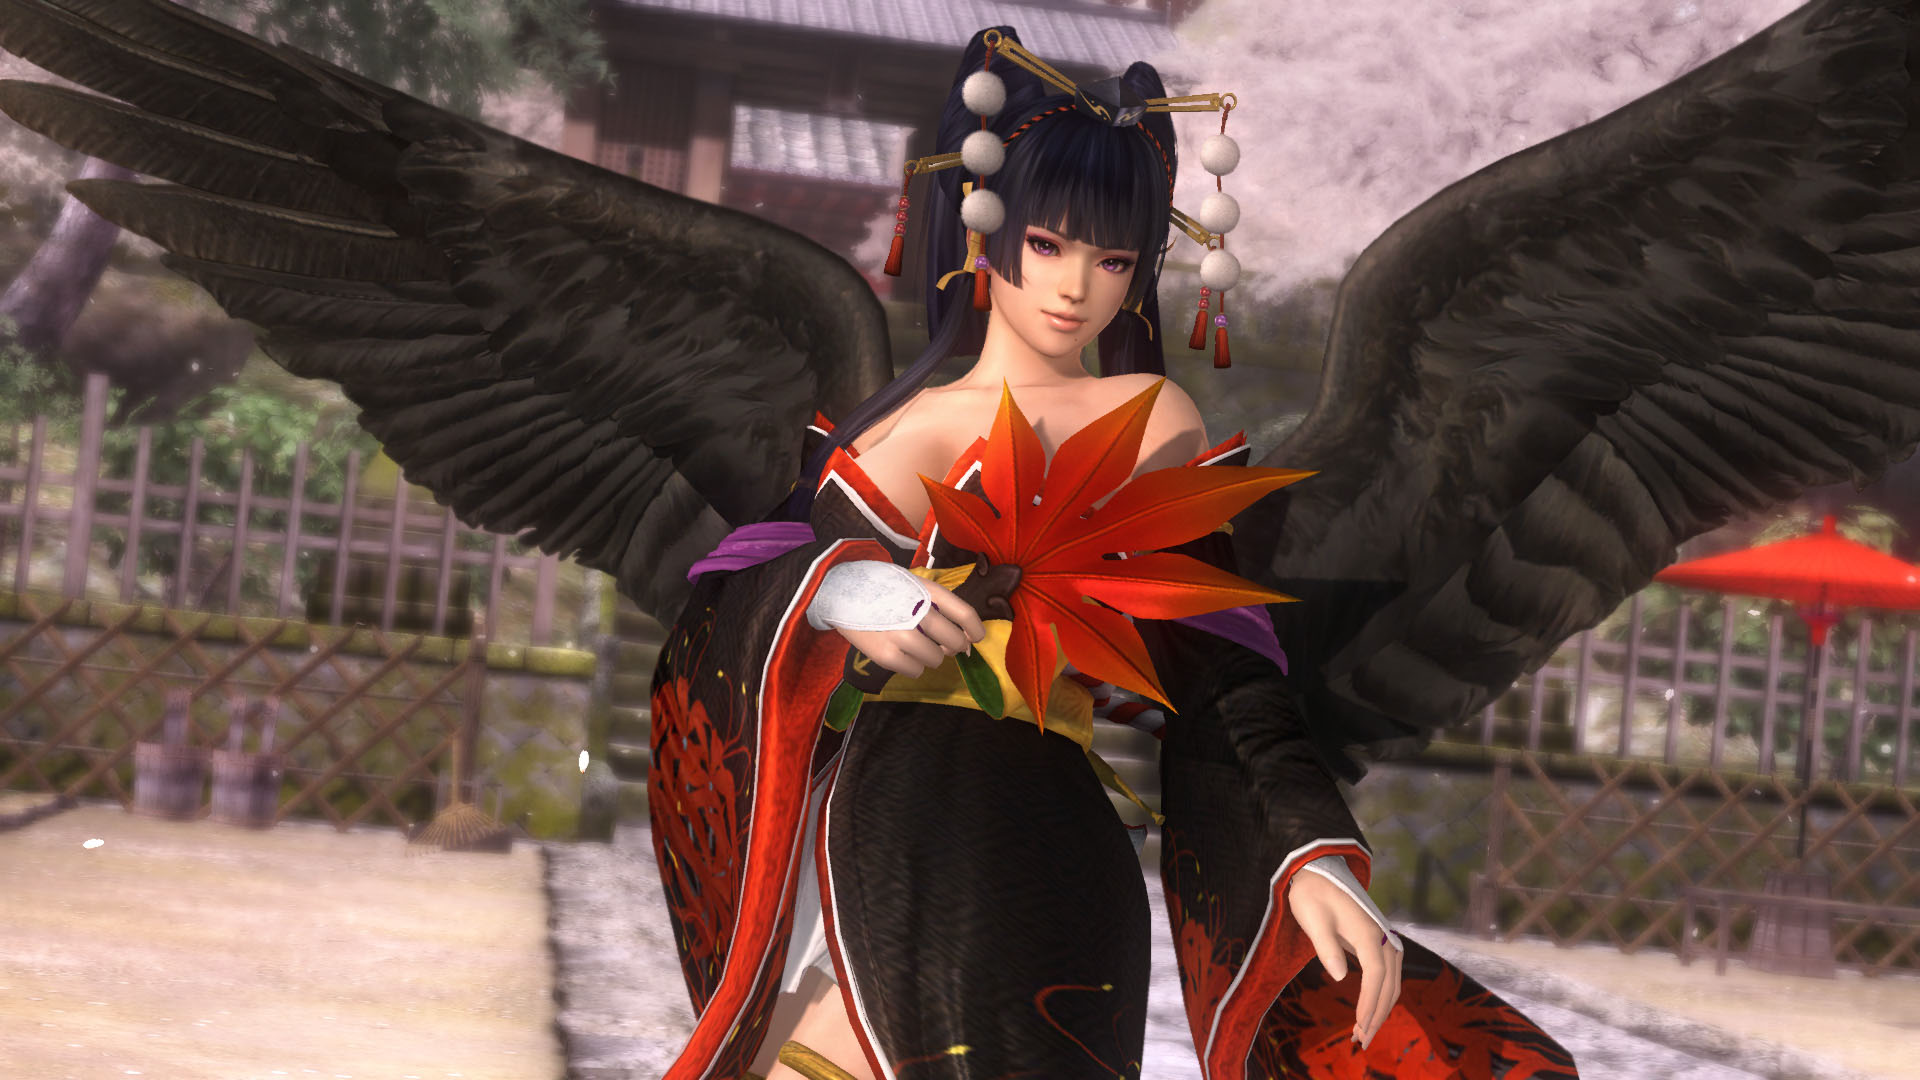 Brina Palencia voices Nyotengu in 'Dead or Alive 5: Ultimate' Art Credit: ©2012-2013 KOEI TECMO GAMES CO., LTD. All rights reserved.